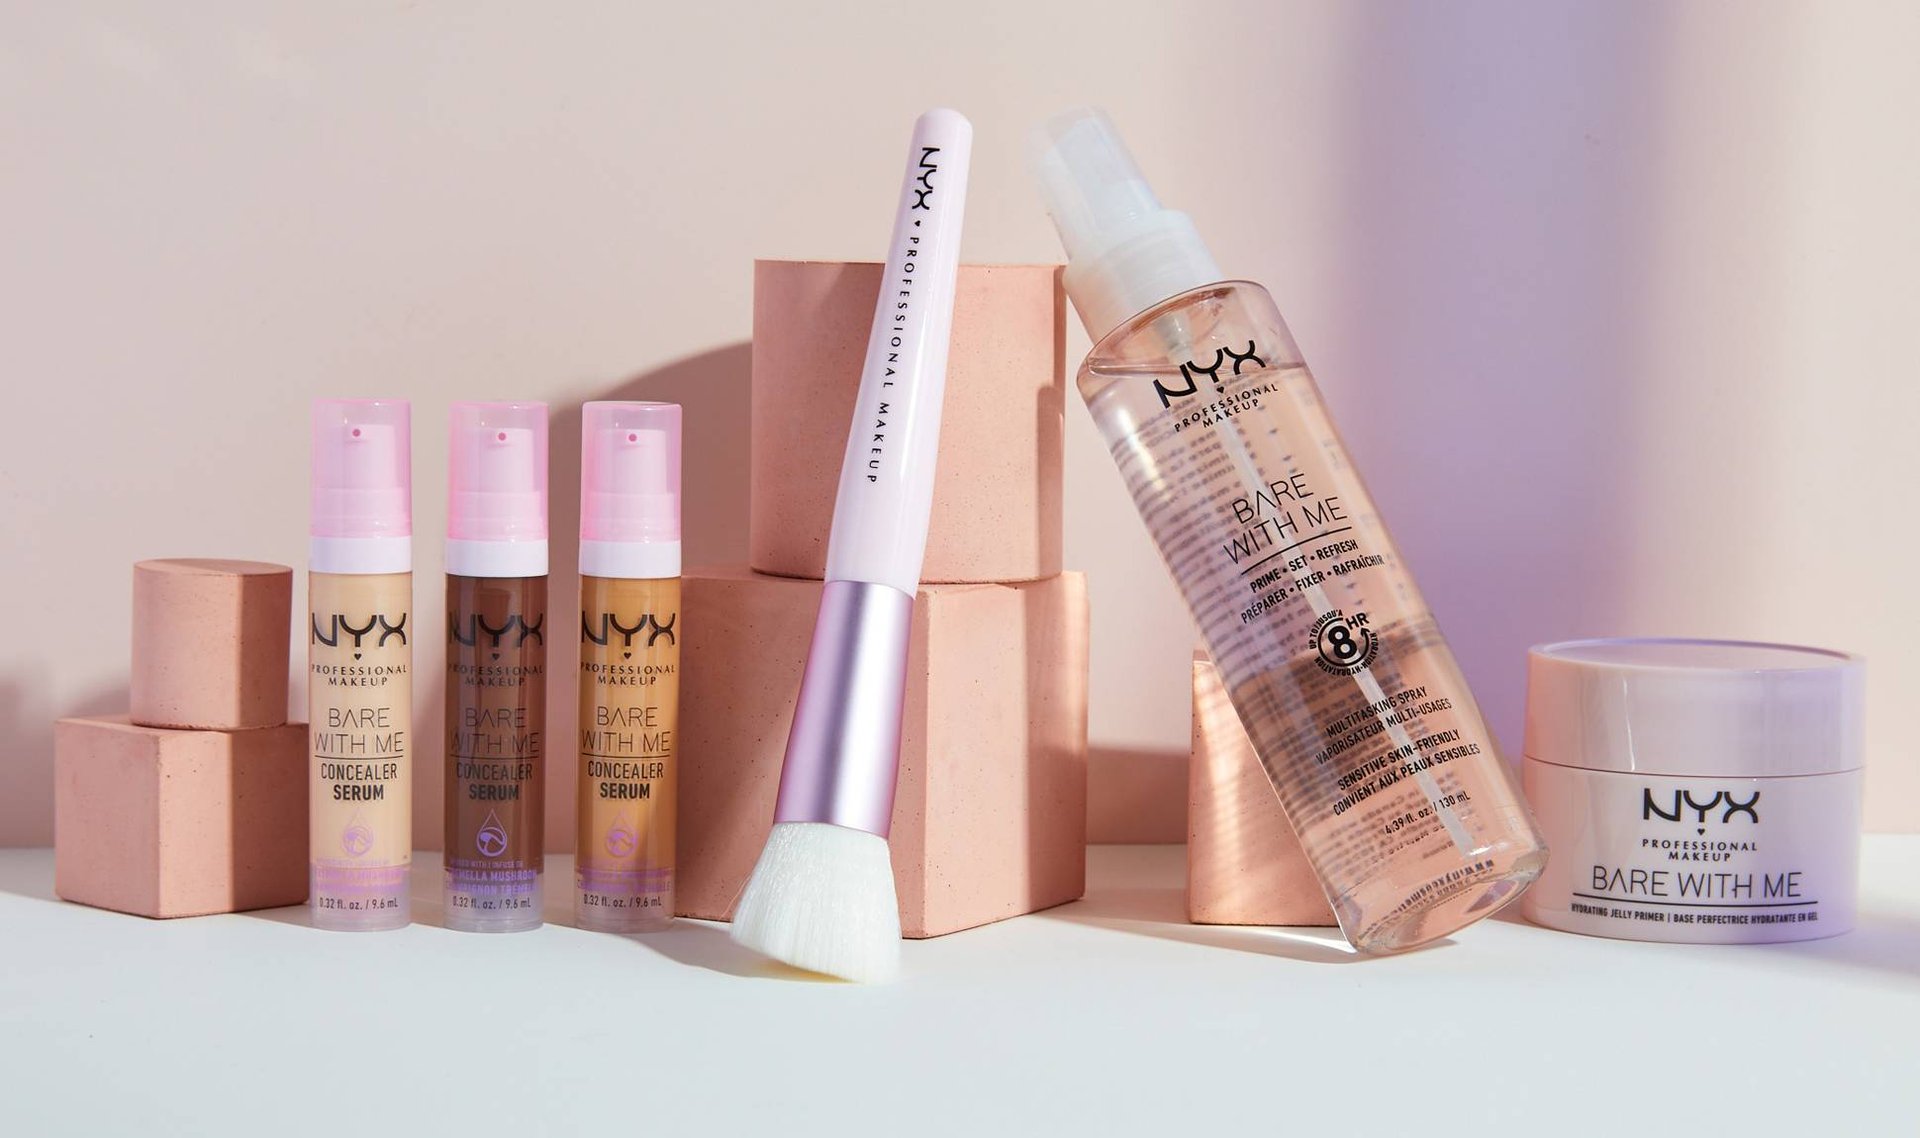 How to Win a Brand New Concealer From NYX, Plus Best Sellers From Its Bare With Me Collection